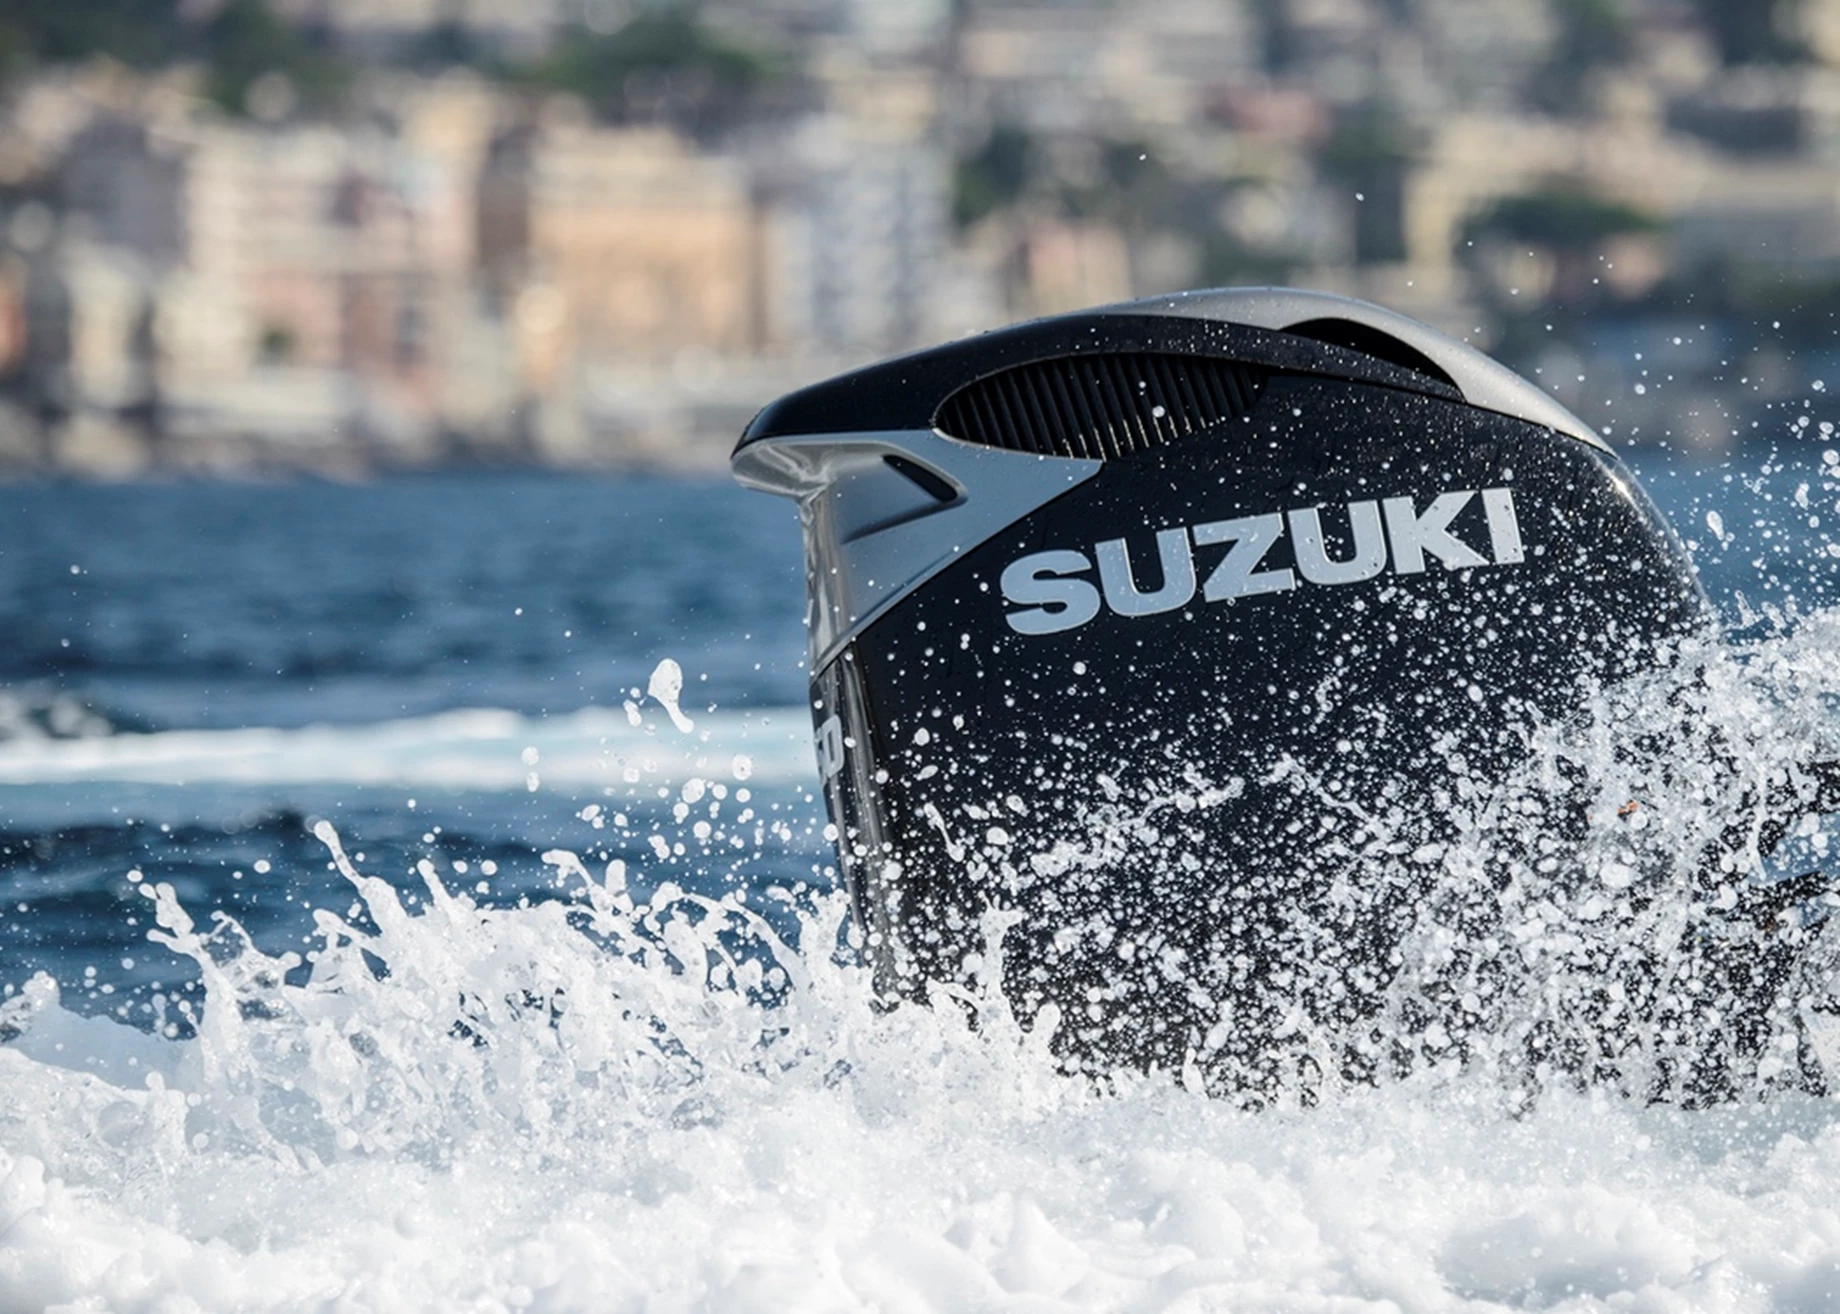 Suzuki outboard powering a boat at speed.